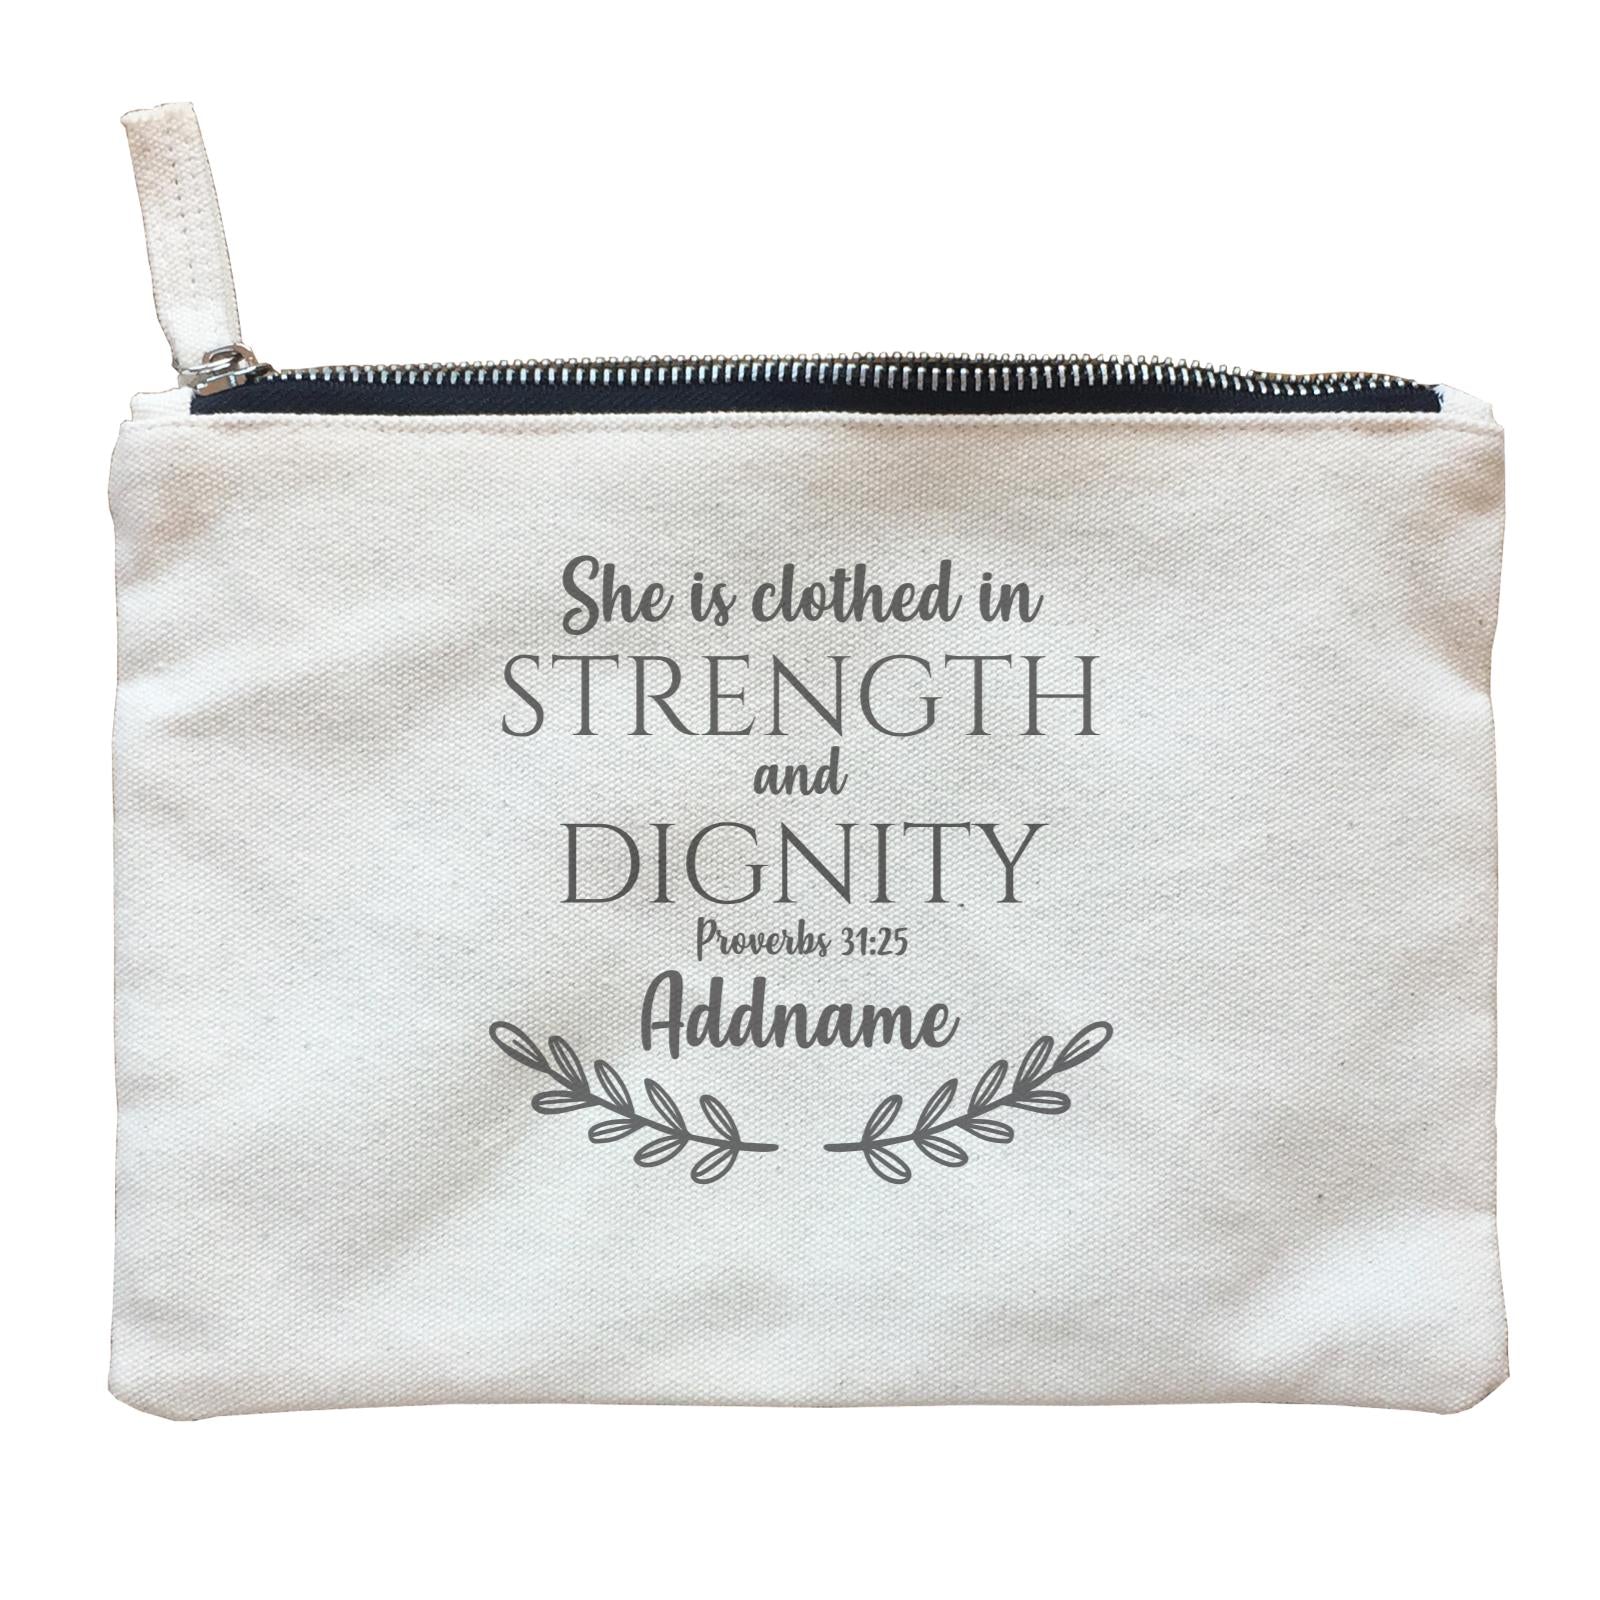 Christian For Her She Is Clothed in Strength and Dignity Proverbs 31.25 Addname Zipper Pouch